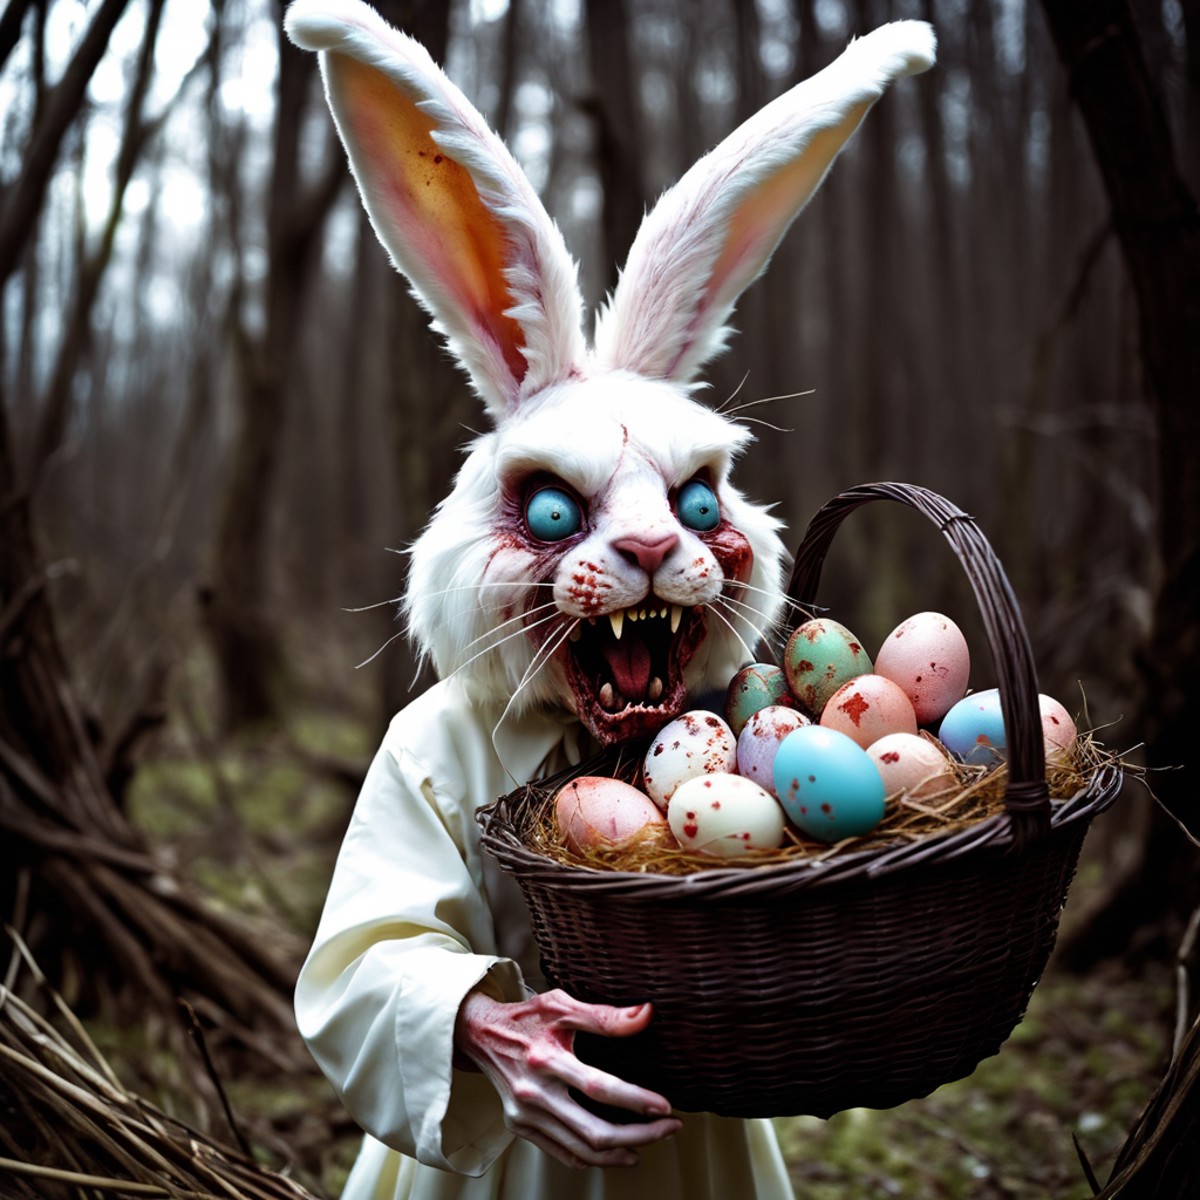 Dreamscape A zombie Easter bunny with matted fur, one ear torn off, decaying flesh, and an unhinged jaw, carrying a wrecke...